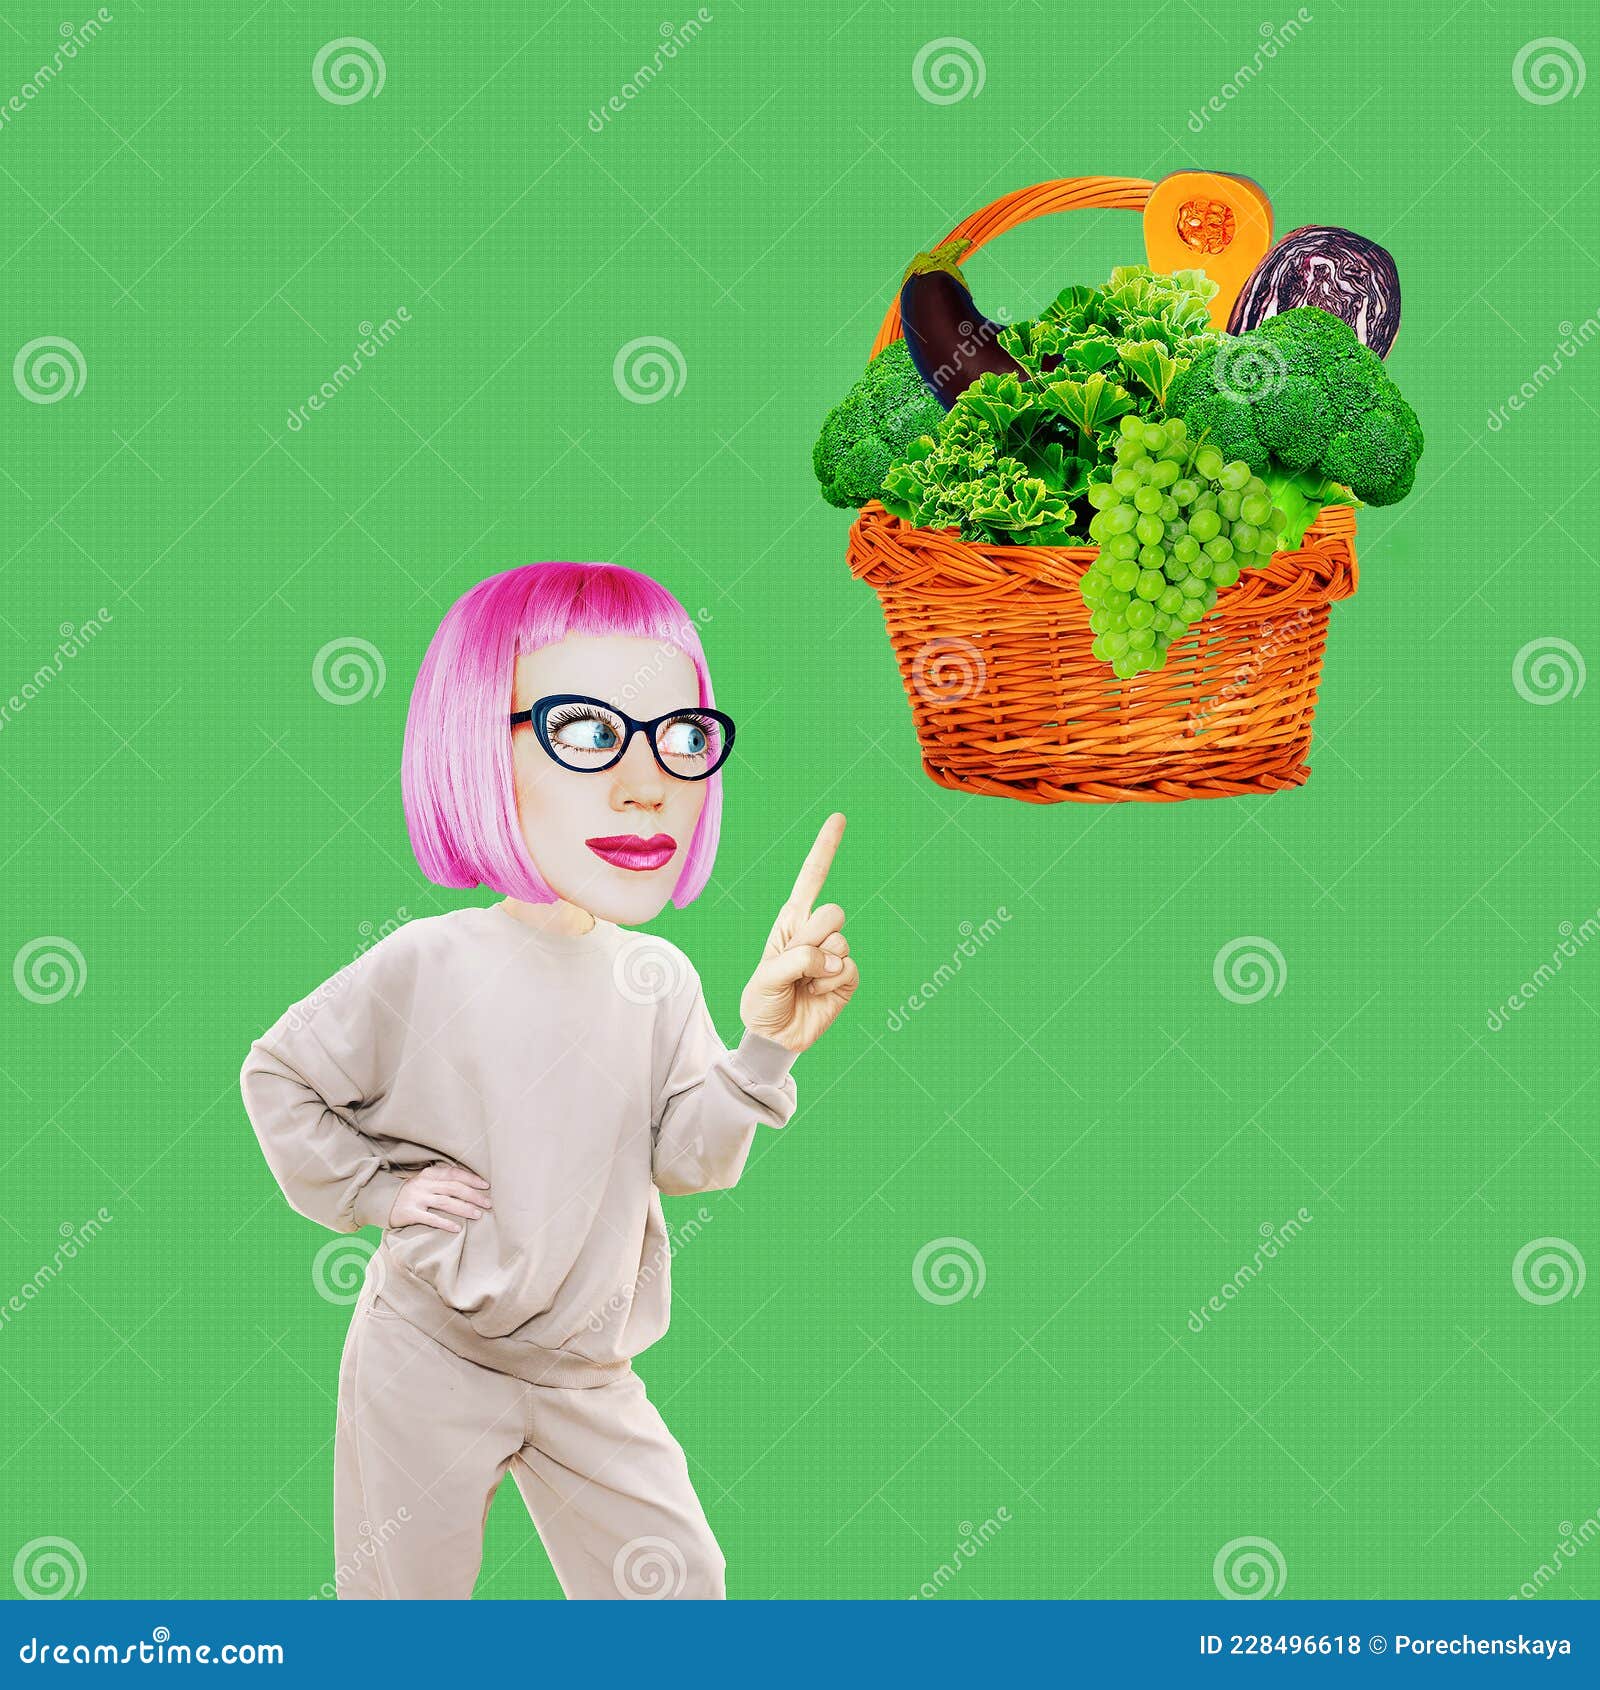 Comic Lady Character with Vegetables Green Basket. Minimal Collage